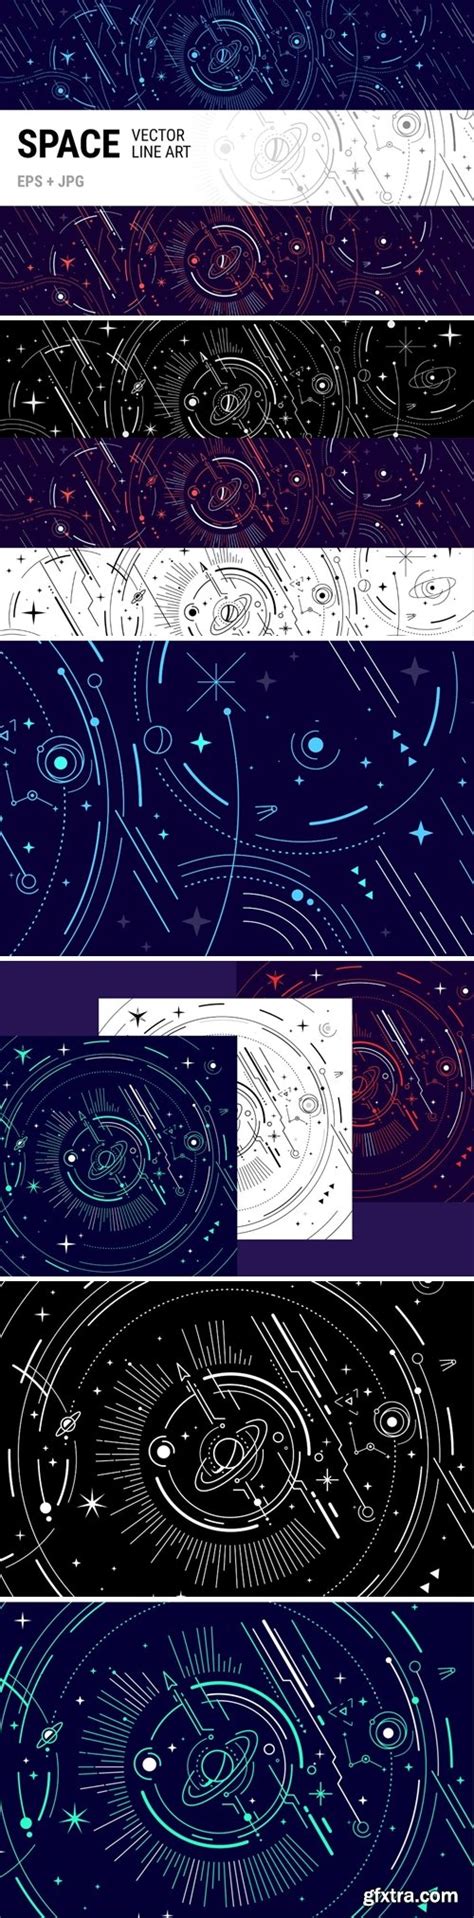 Abstract Space Line Art Set Gfxtra